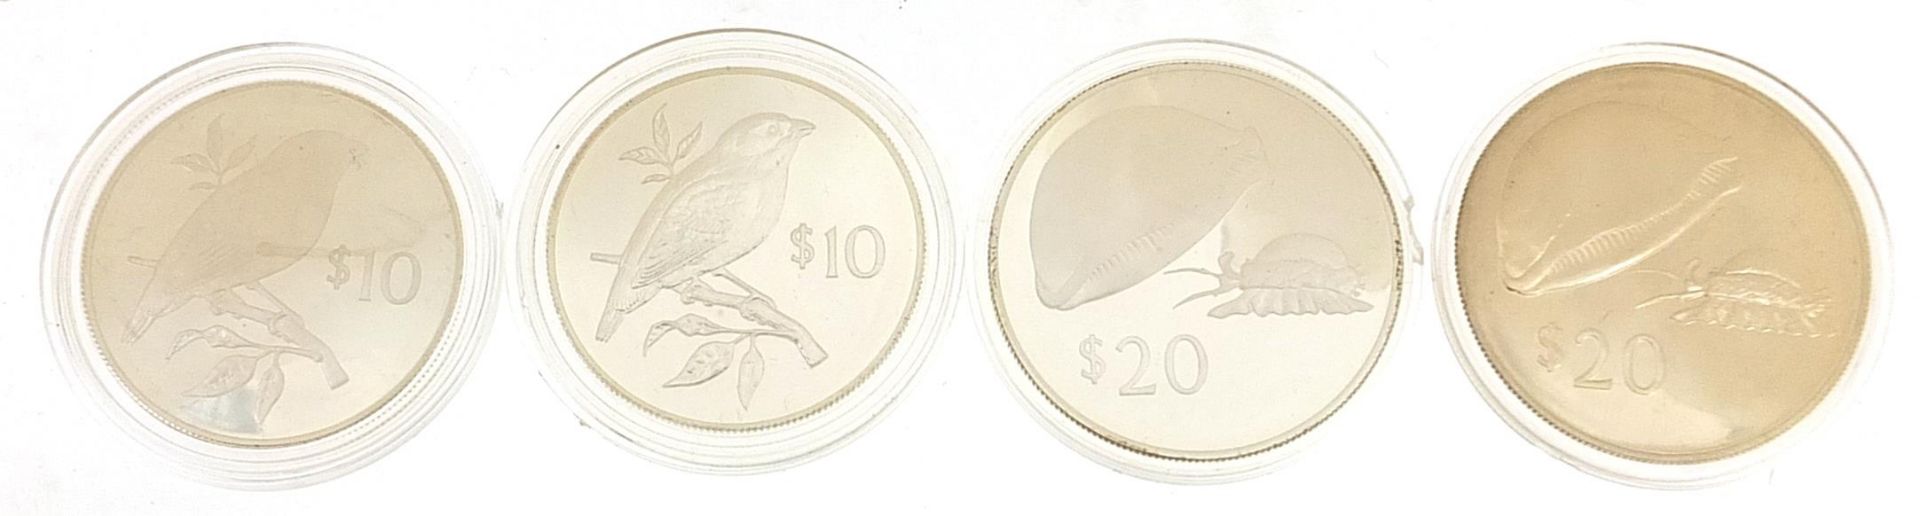 Four Elizabeth II silver proof coins with cases from the Conservation Coin Collection issued by - Image 2 of 4